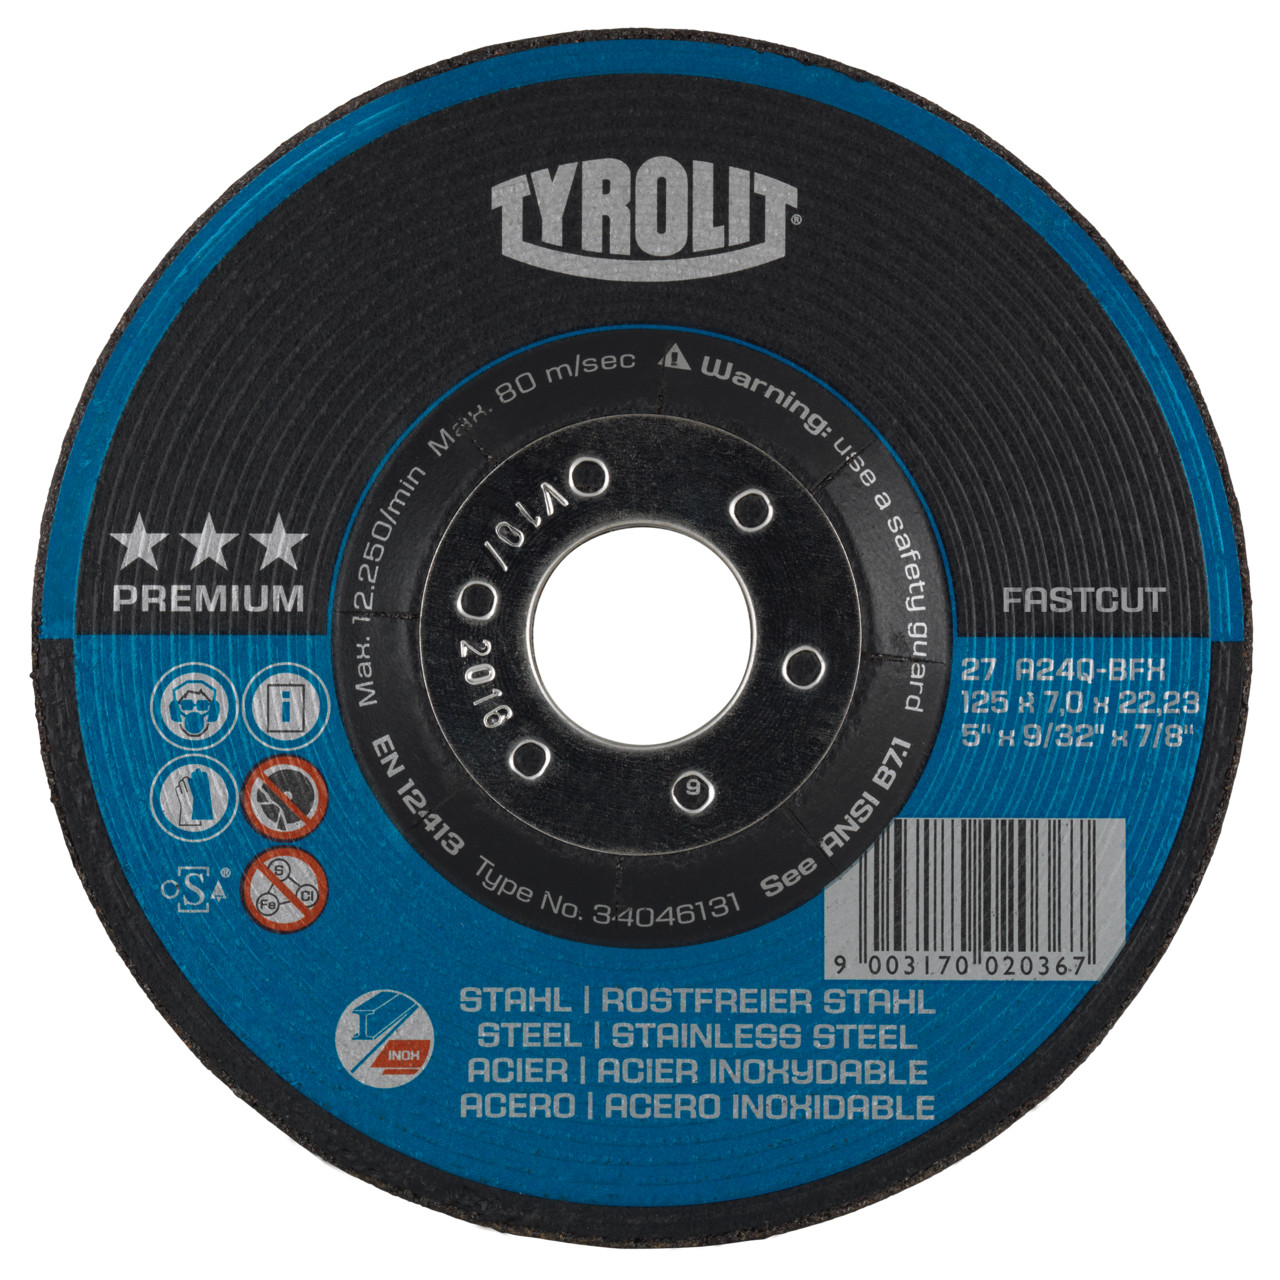 TYROLIT grinding wheel DxUxH 178x7x22.23 FASTCUT for steel and stainless steel, shape: 27 - offset version, Art. 1421